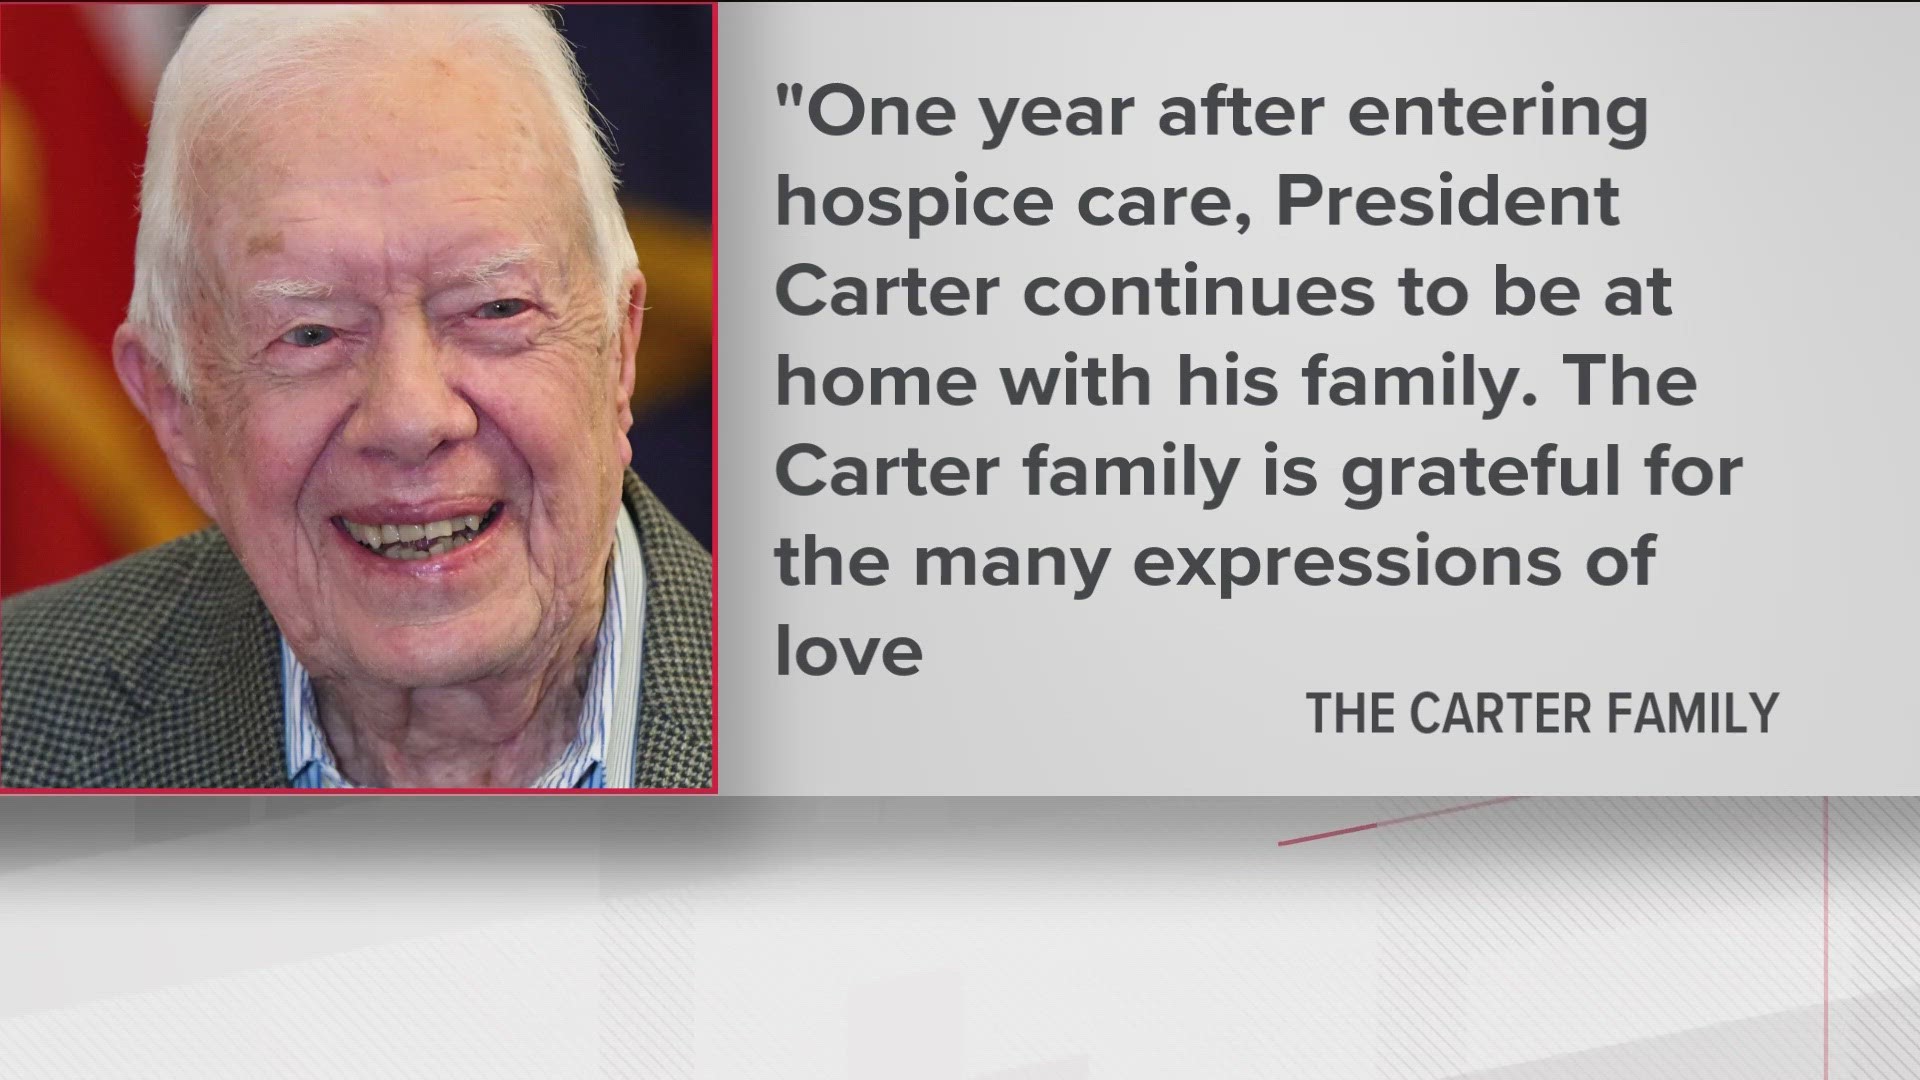 Sunday, Feb. 18, was one year since Jimmy Carter entered hospice care.